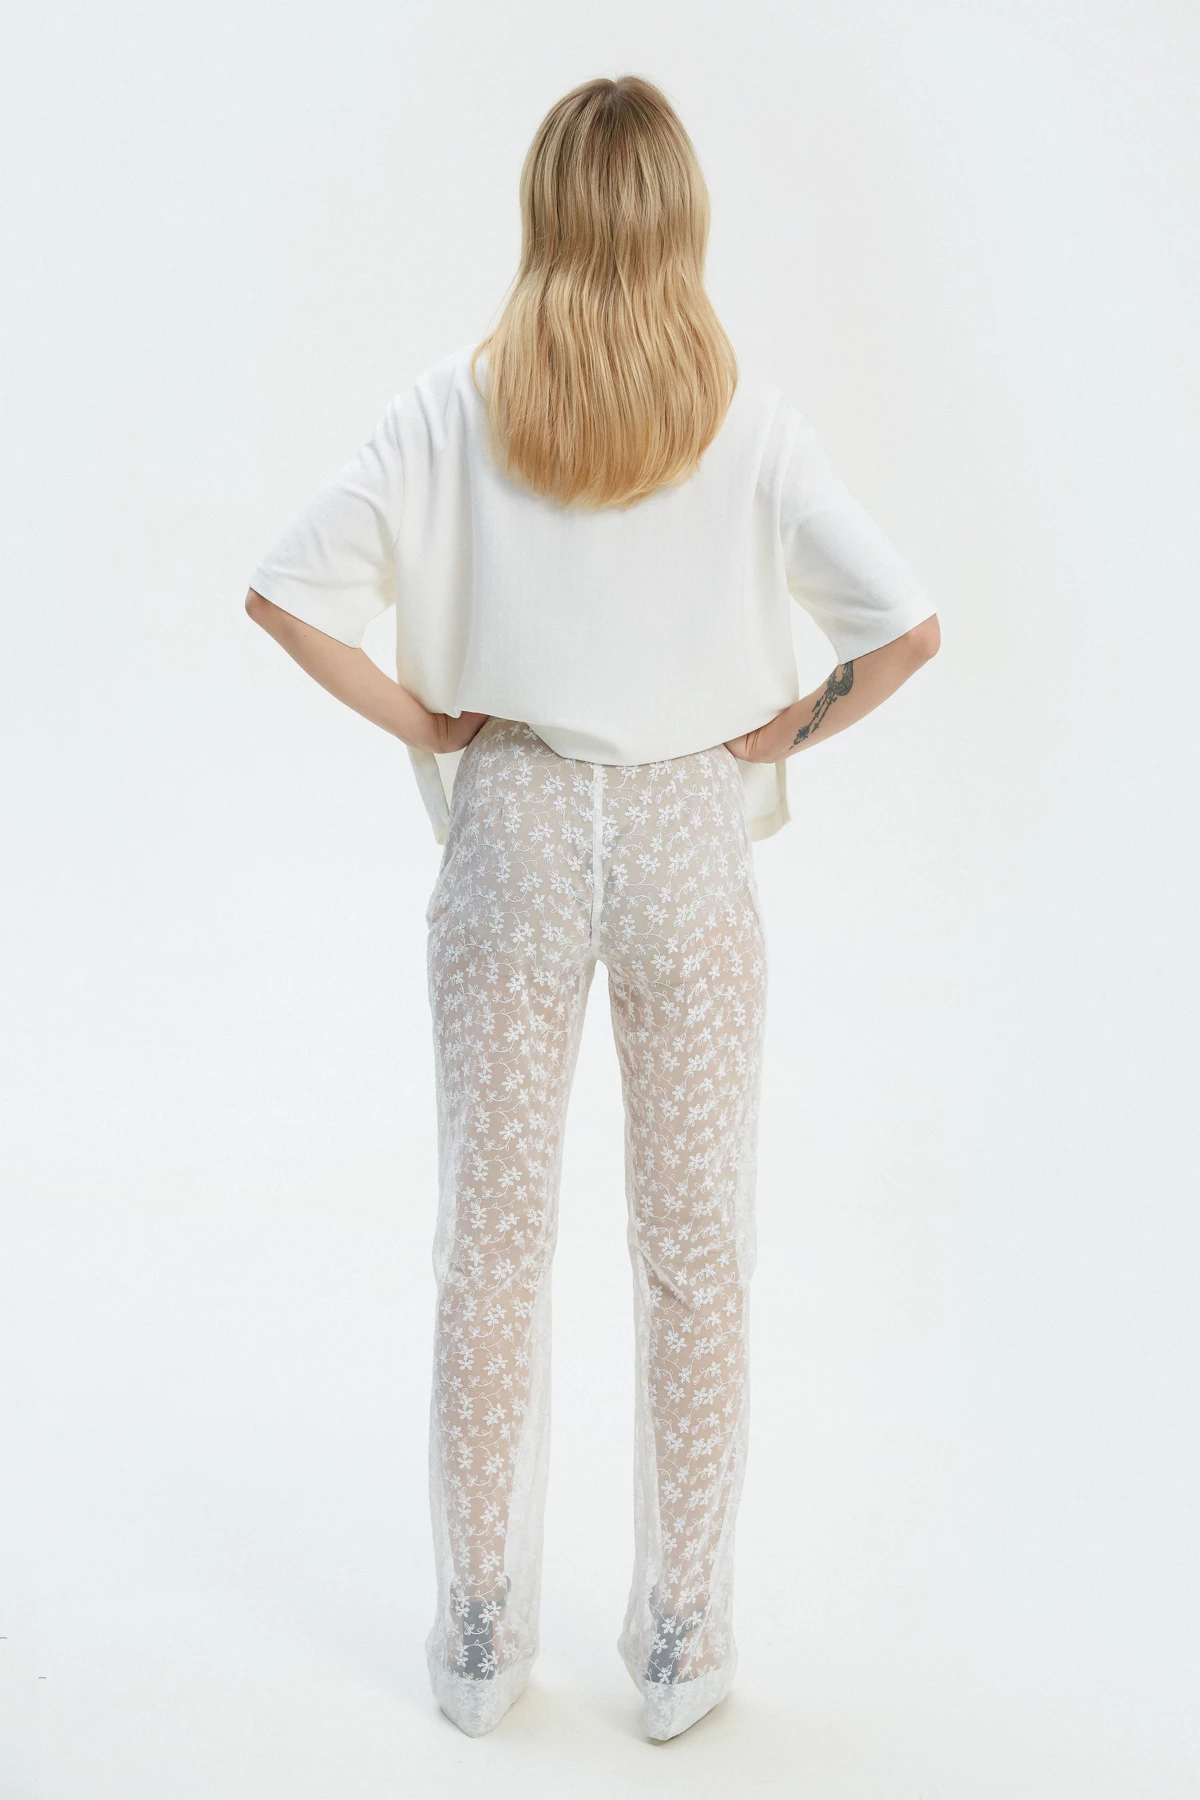 Milky flared lace pants, photo 3